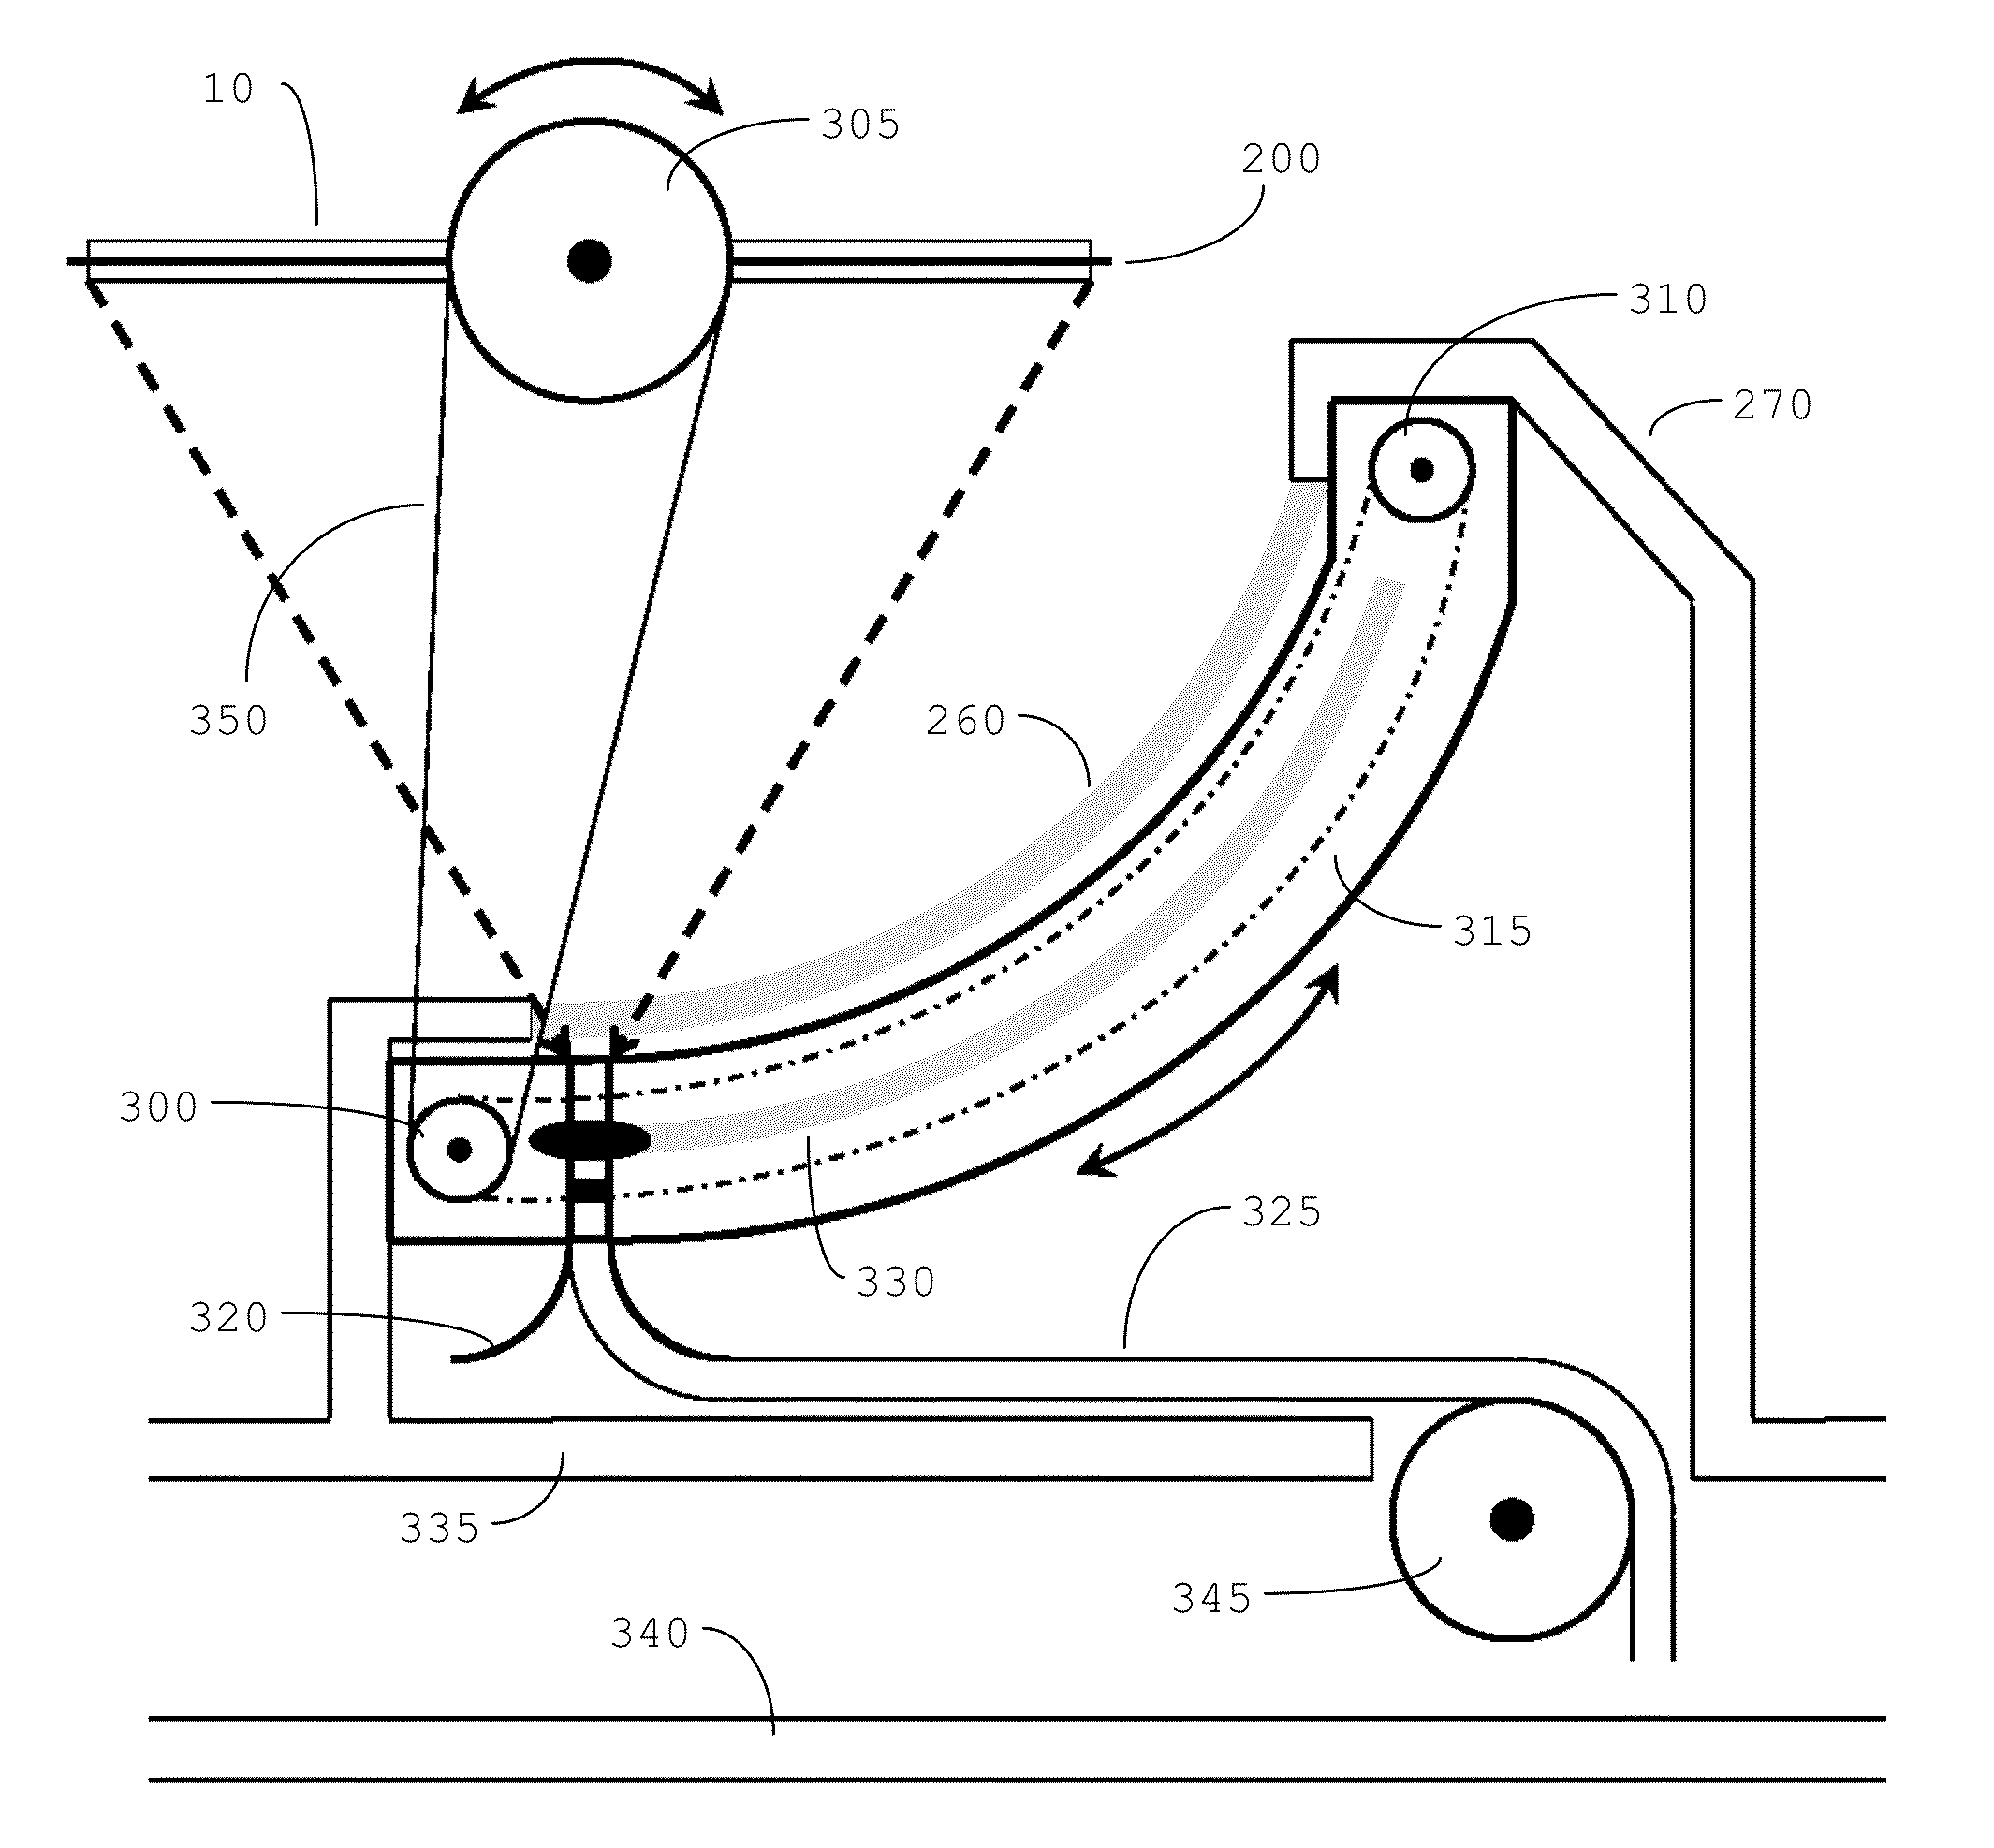 Method and apparatus for electricity production by means of solar thermal transformation